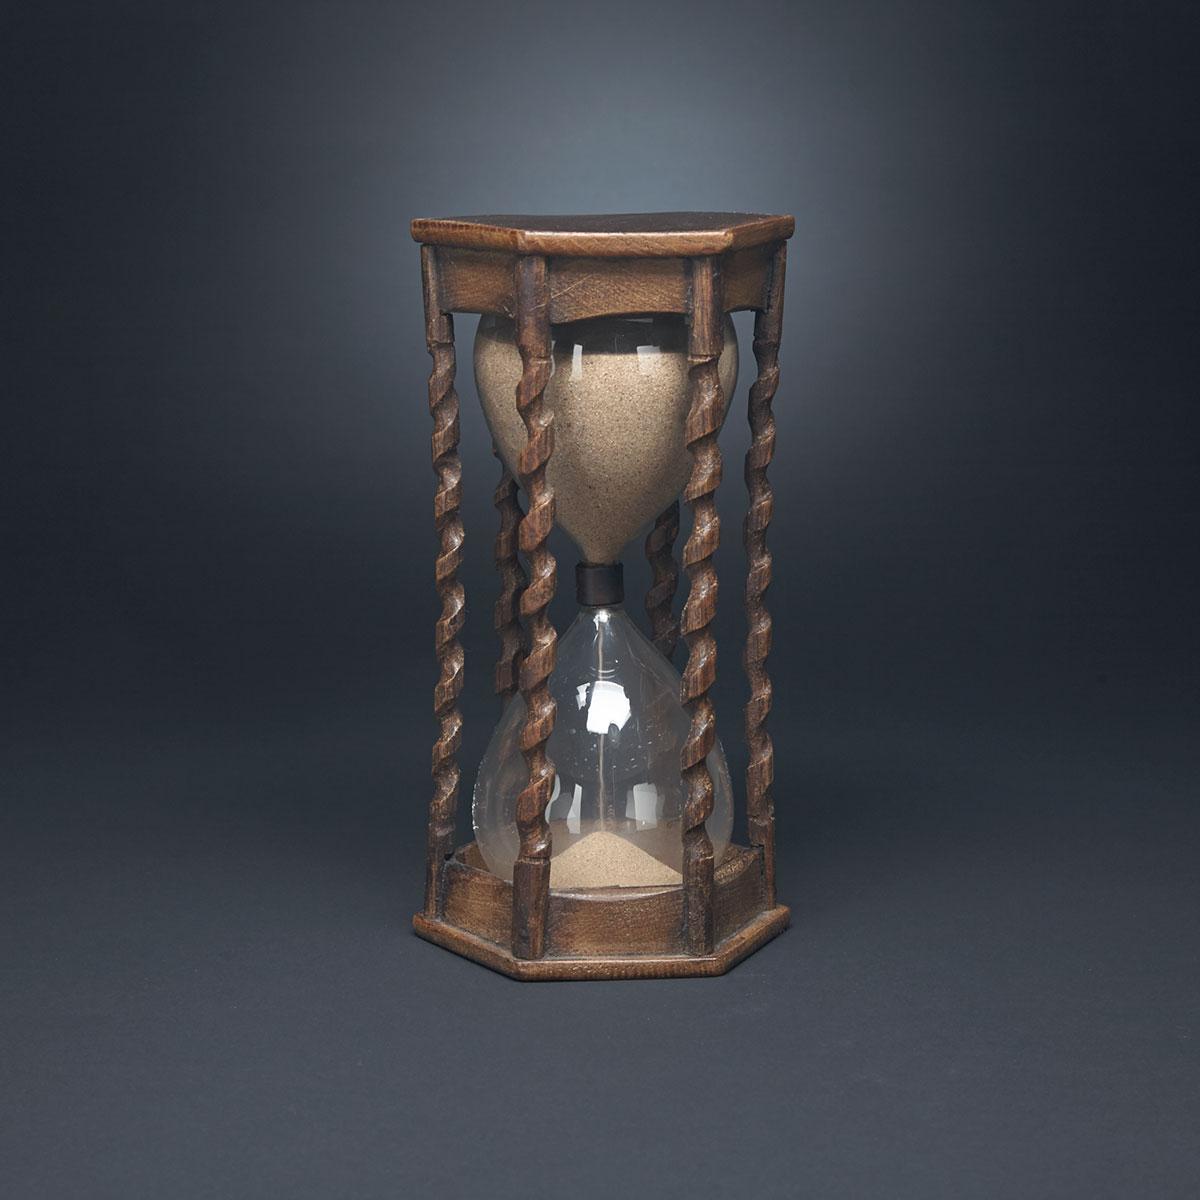 French Carved Oak Hour or Sand Glass, 19th century